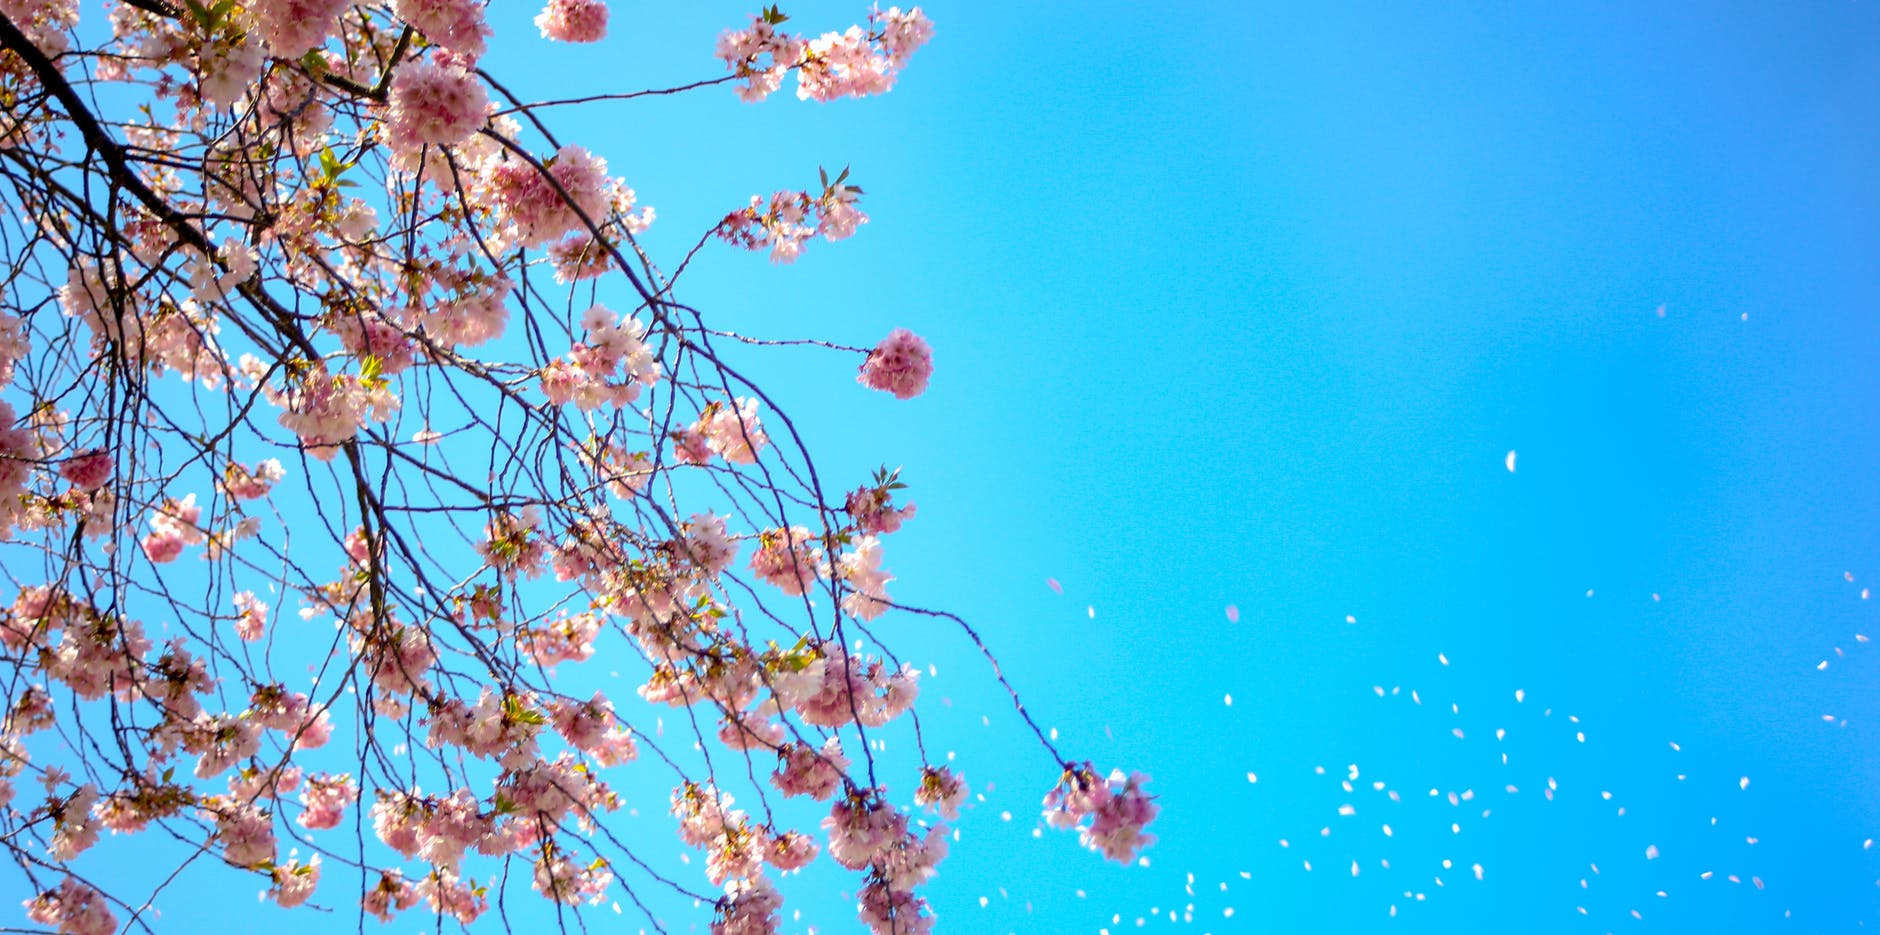 Vancouver Cherry Blossoms and blue sky